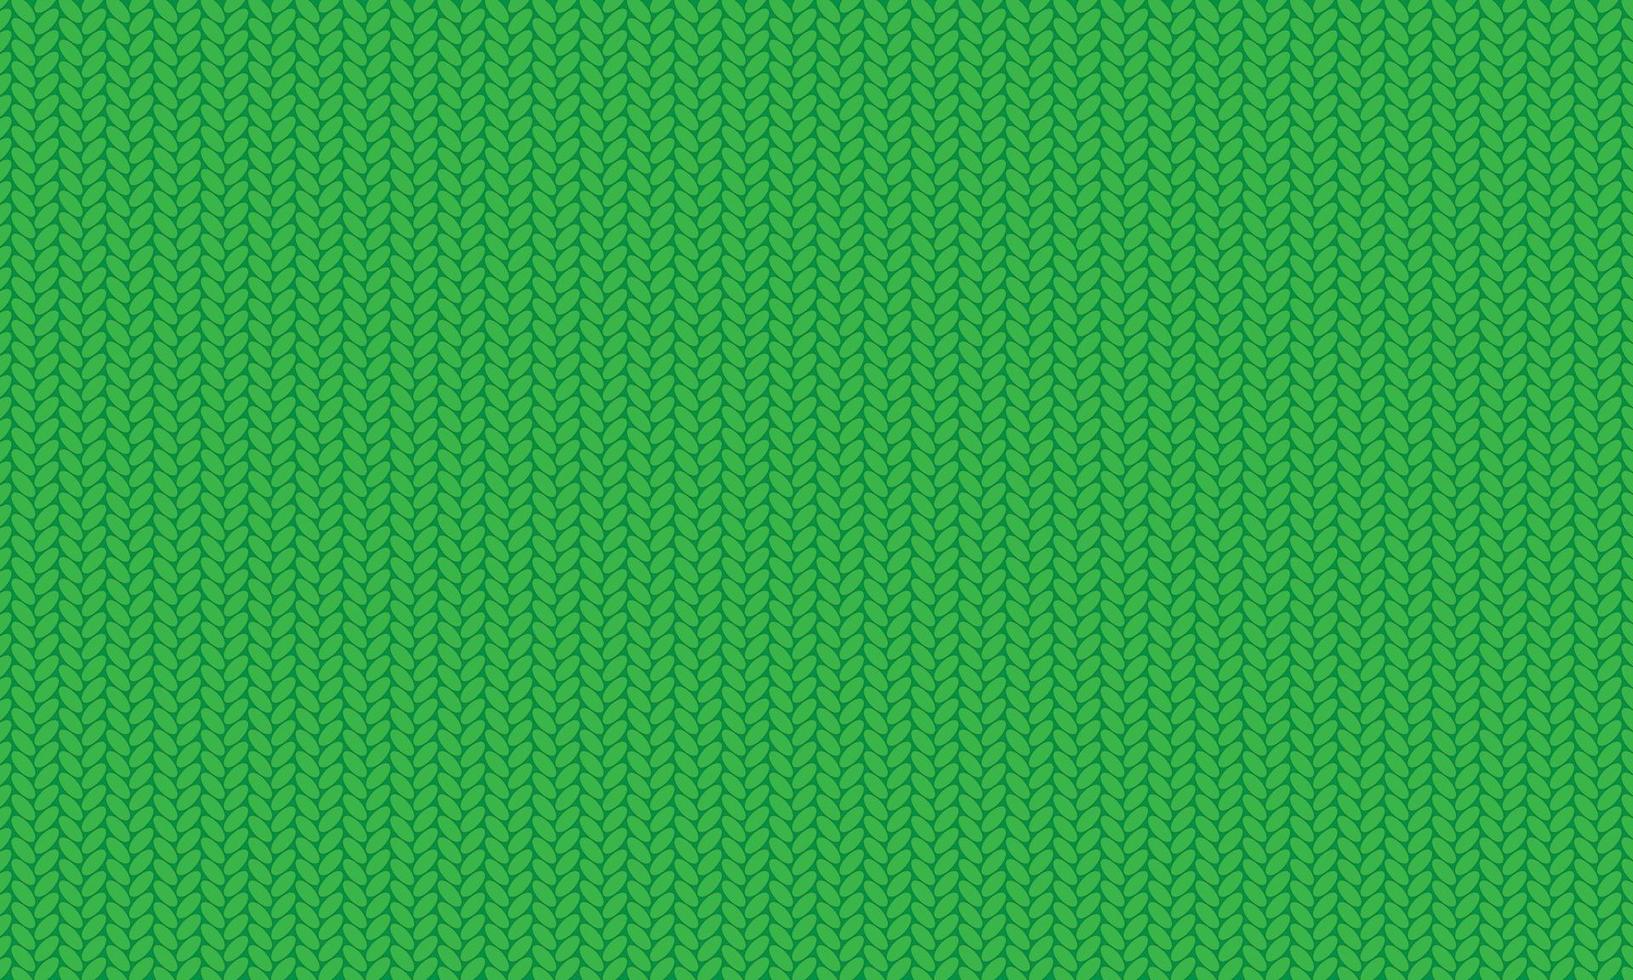 Texture of green knitted fabric. Cozy red knitting pattern vector